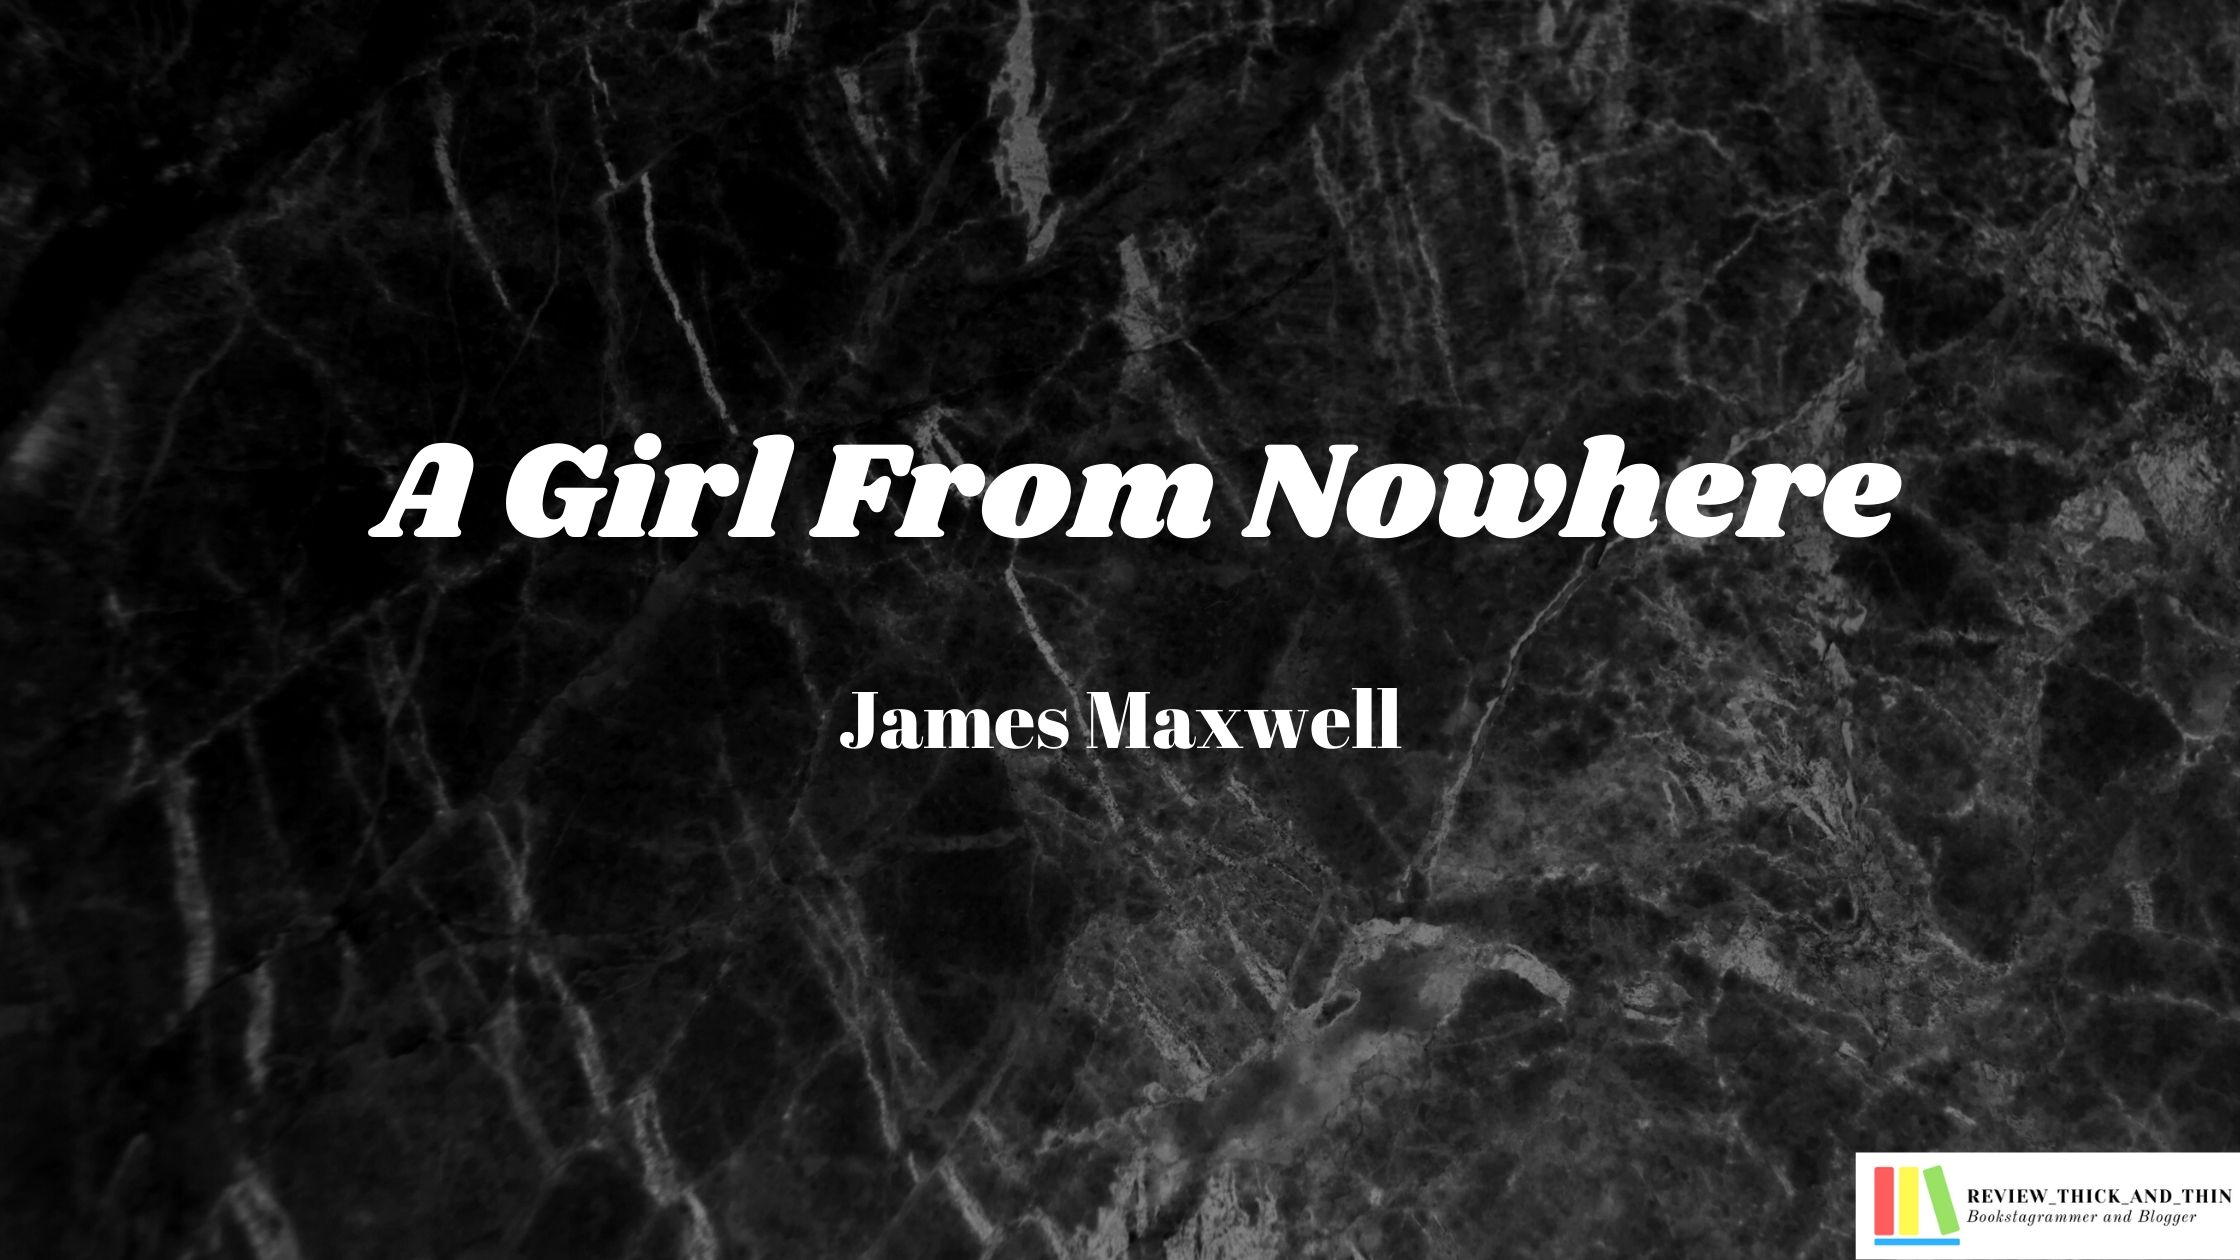 Book Review of “A Girl From Nowhere” by James Maxwell